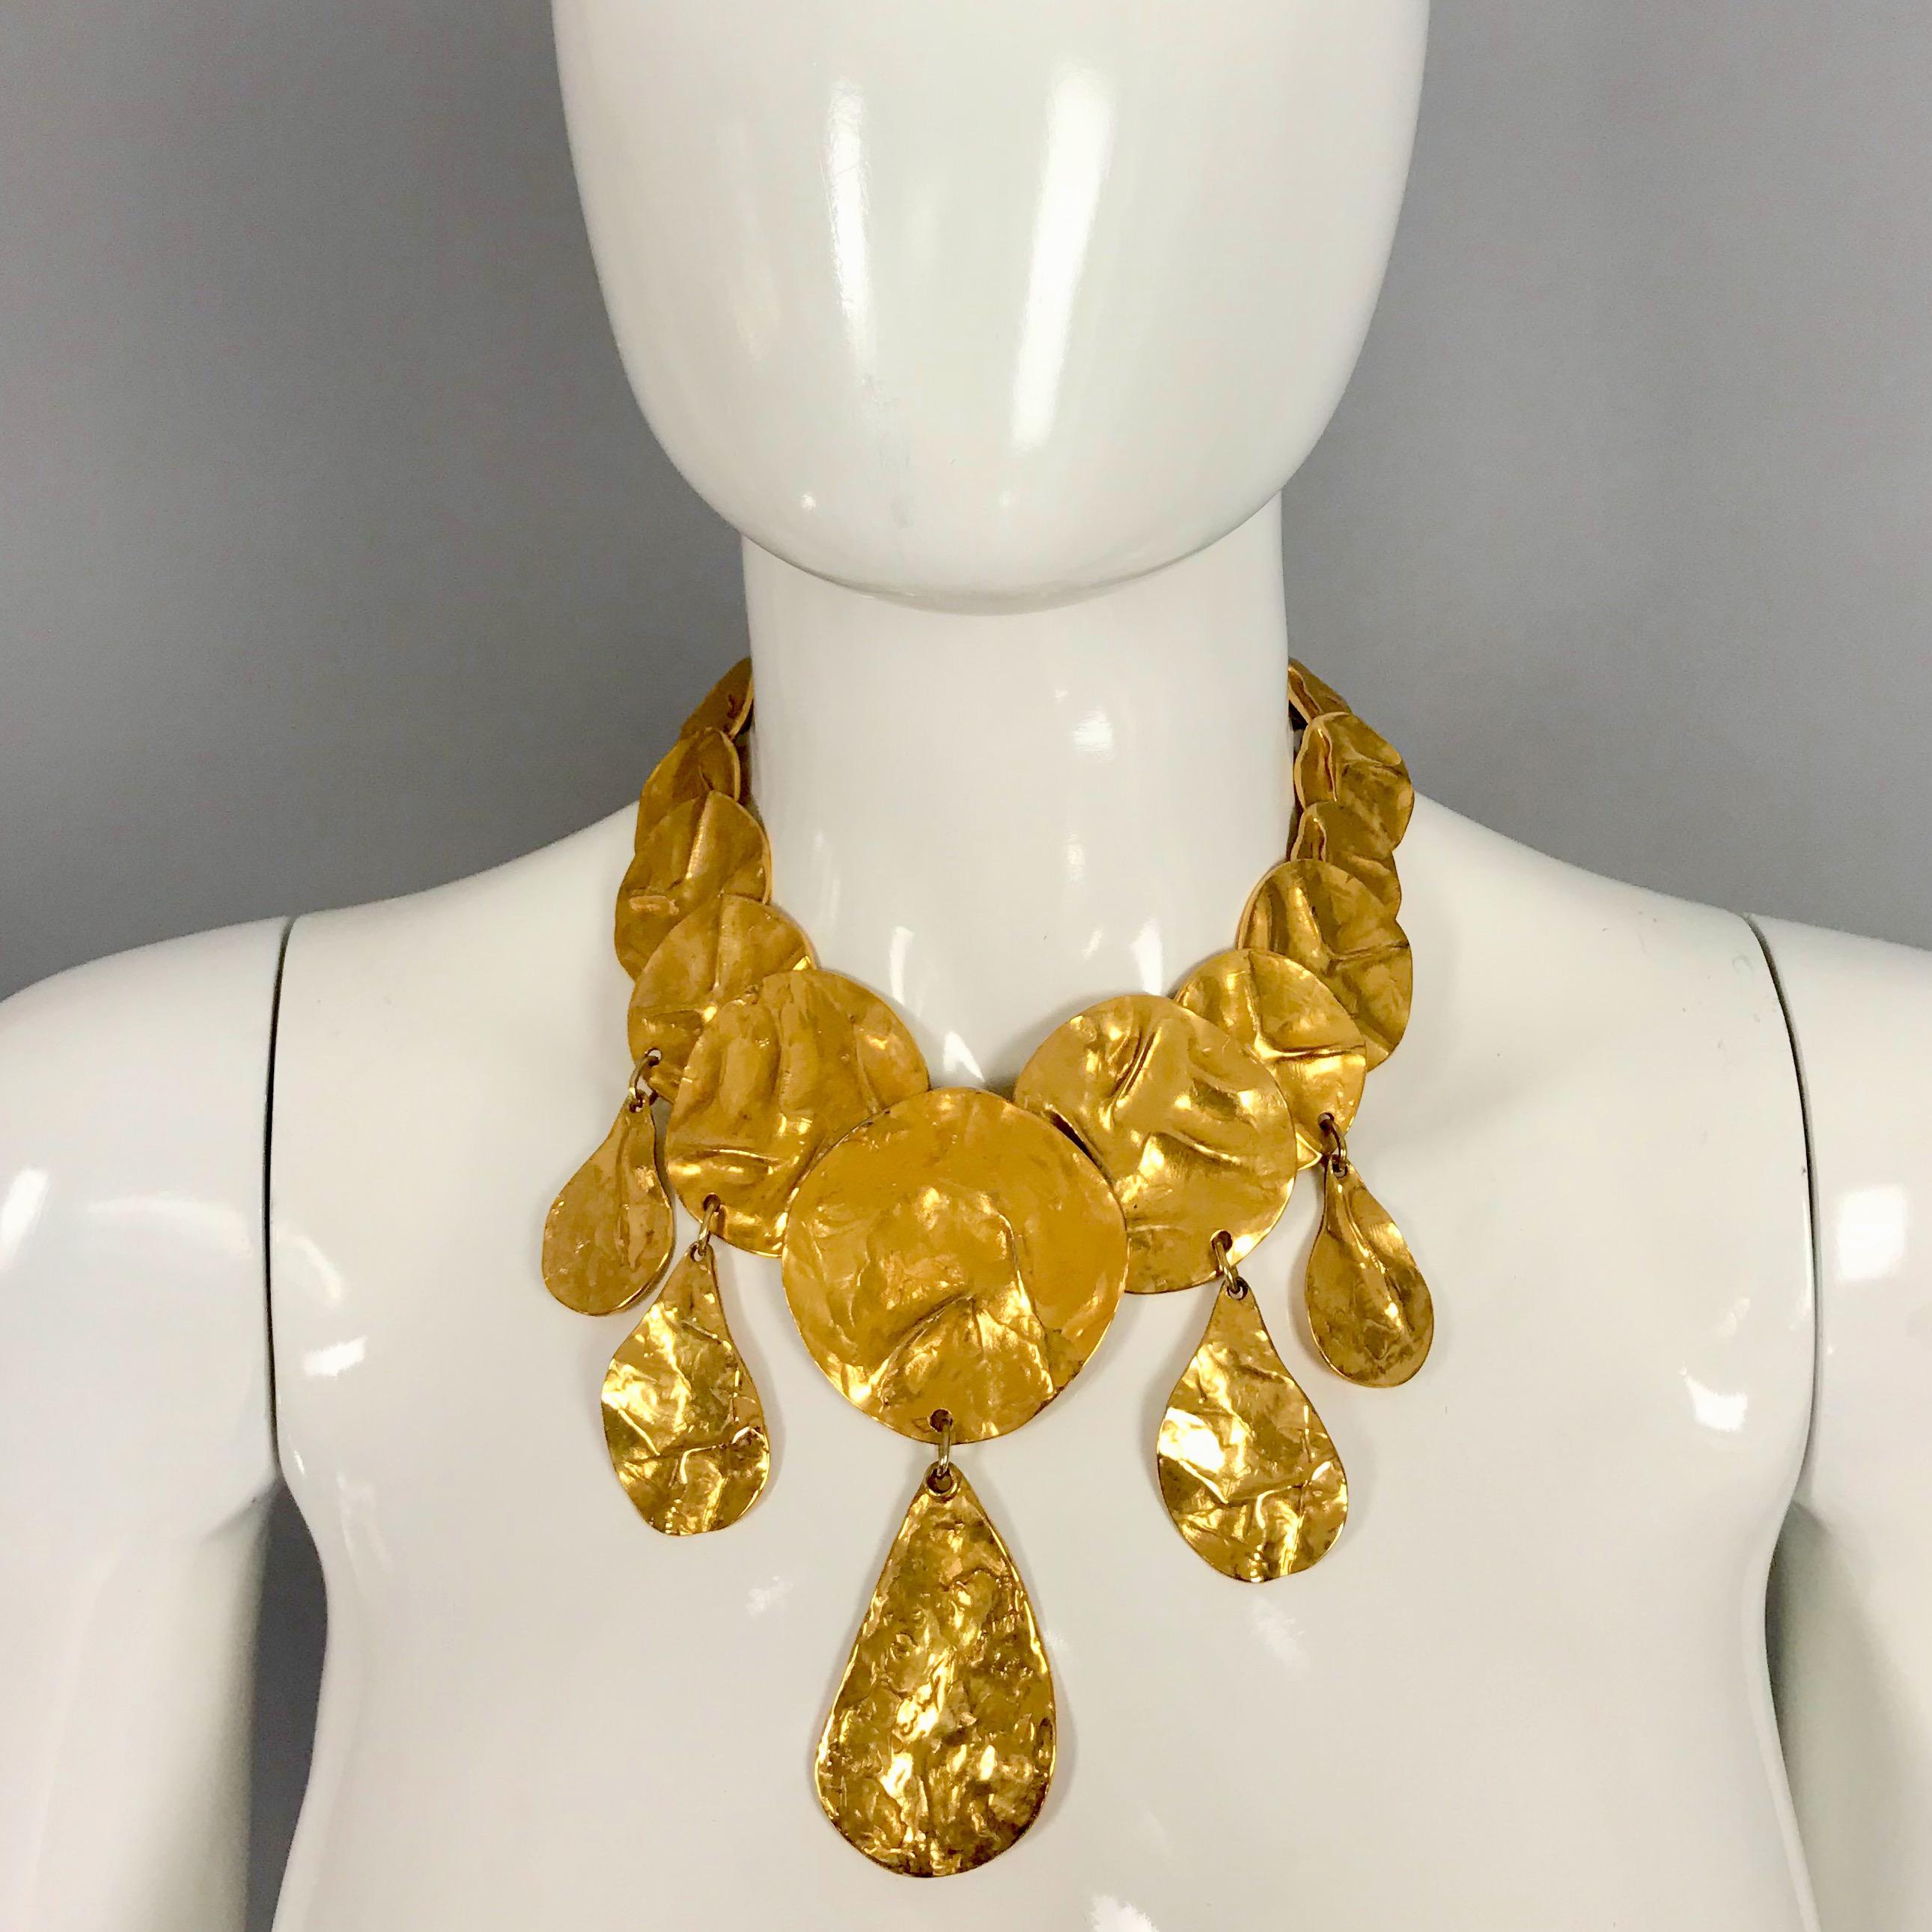 Vintage YVES SAINT LAURENT Ysl by Robert Goossens Wrinkled Disc Charm Necklace

Measurements:
Height: 4.52 inches  (11.5 cms)
Wearable Length: 16.14 inches to 20.07 inches (41 cm to 51 cm)

Features:
- 100% Authentic YVES SAINT LAURENT by Robert